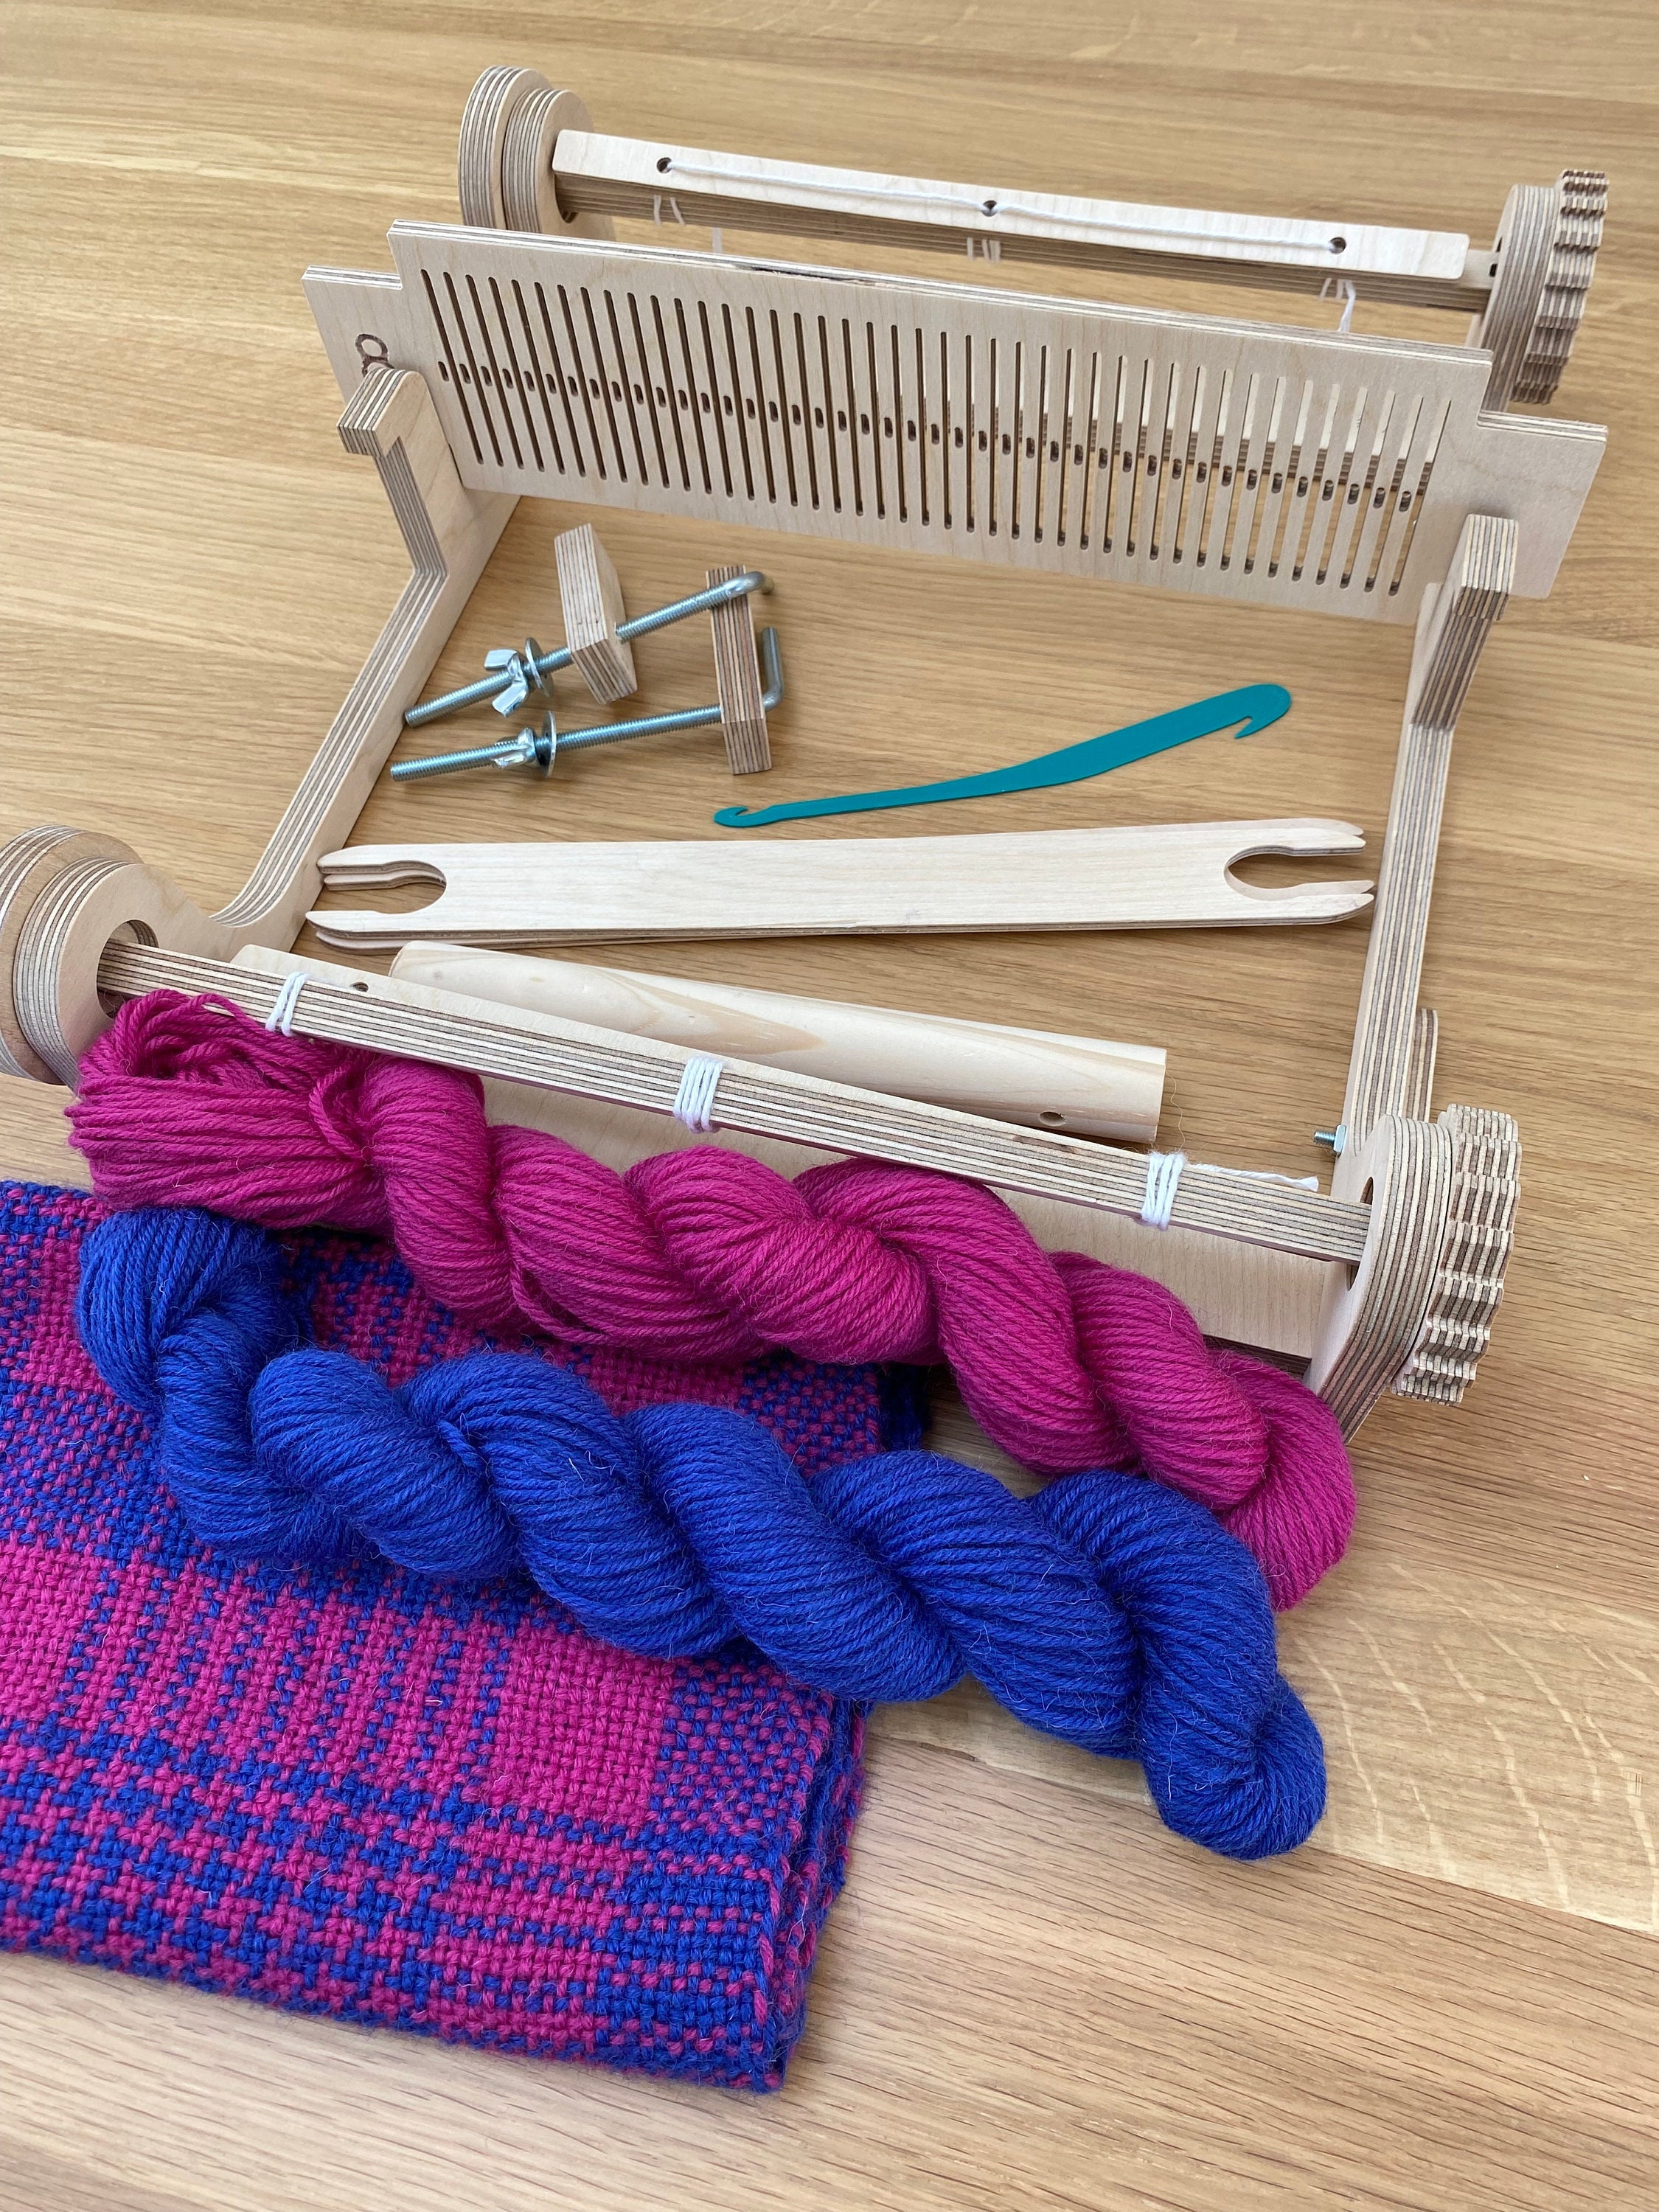 Scarf - woven with a peg loom - The Mini Smallholder